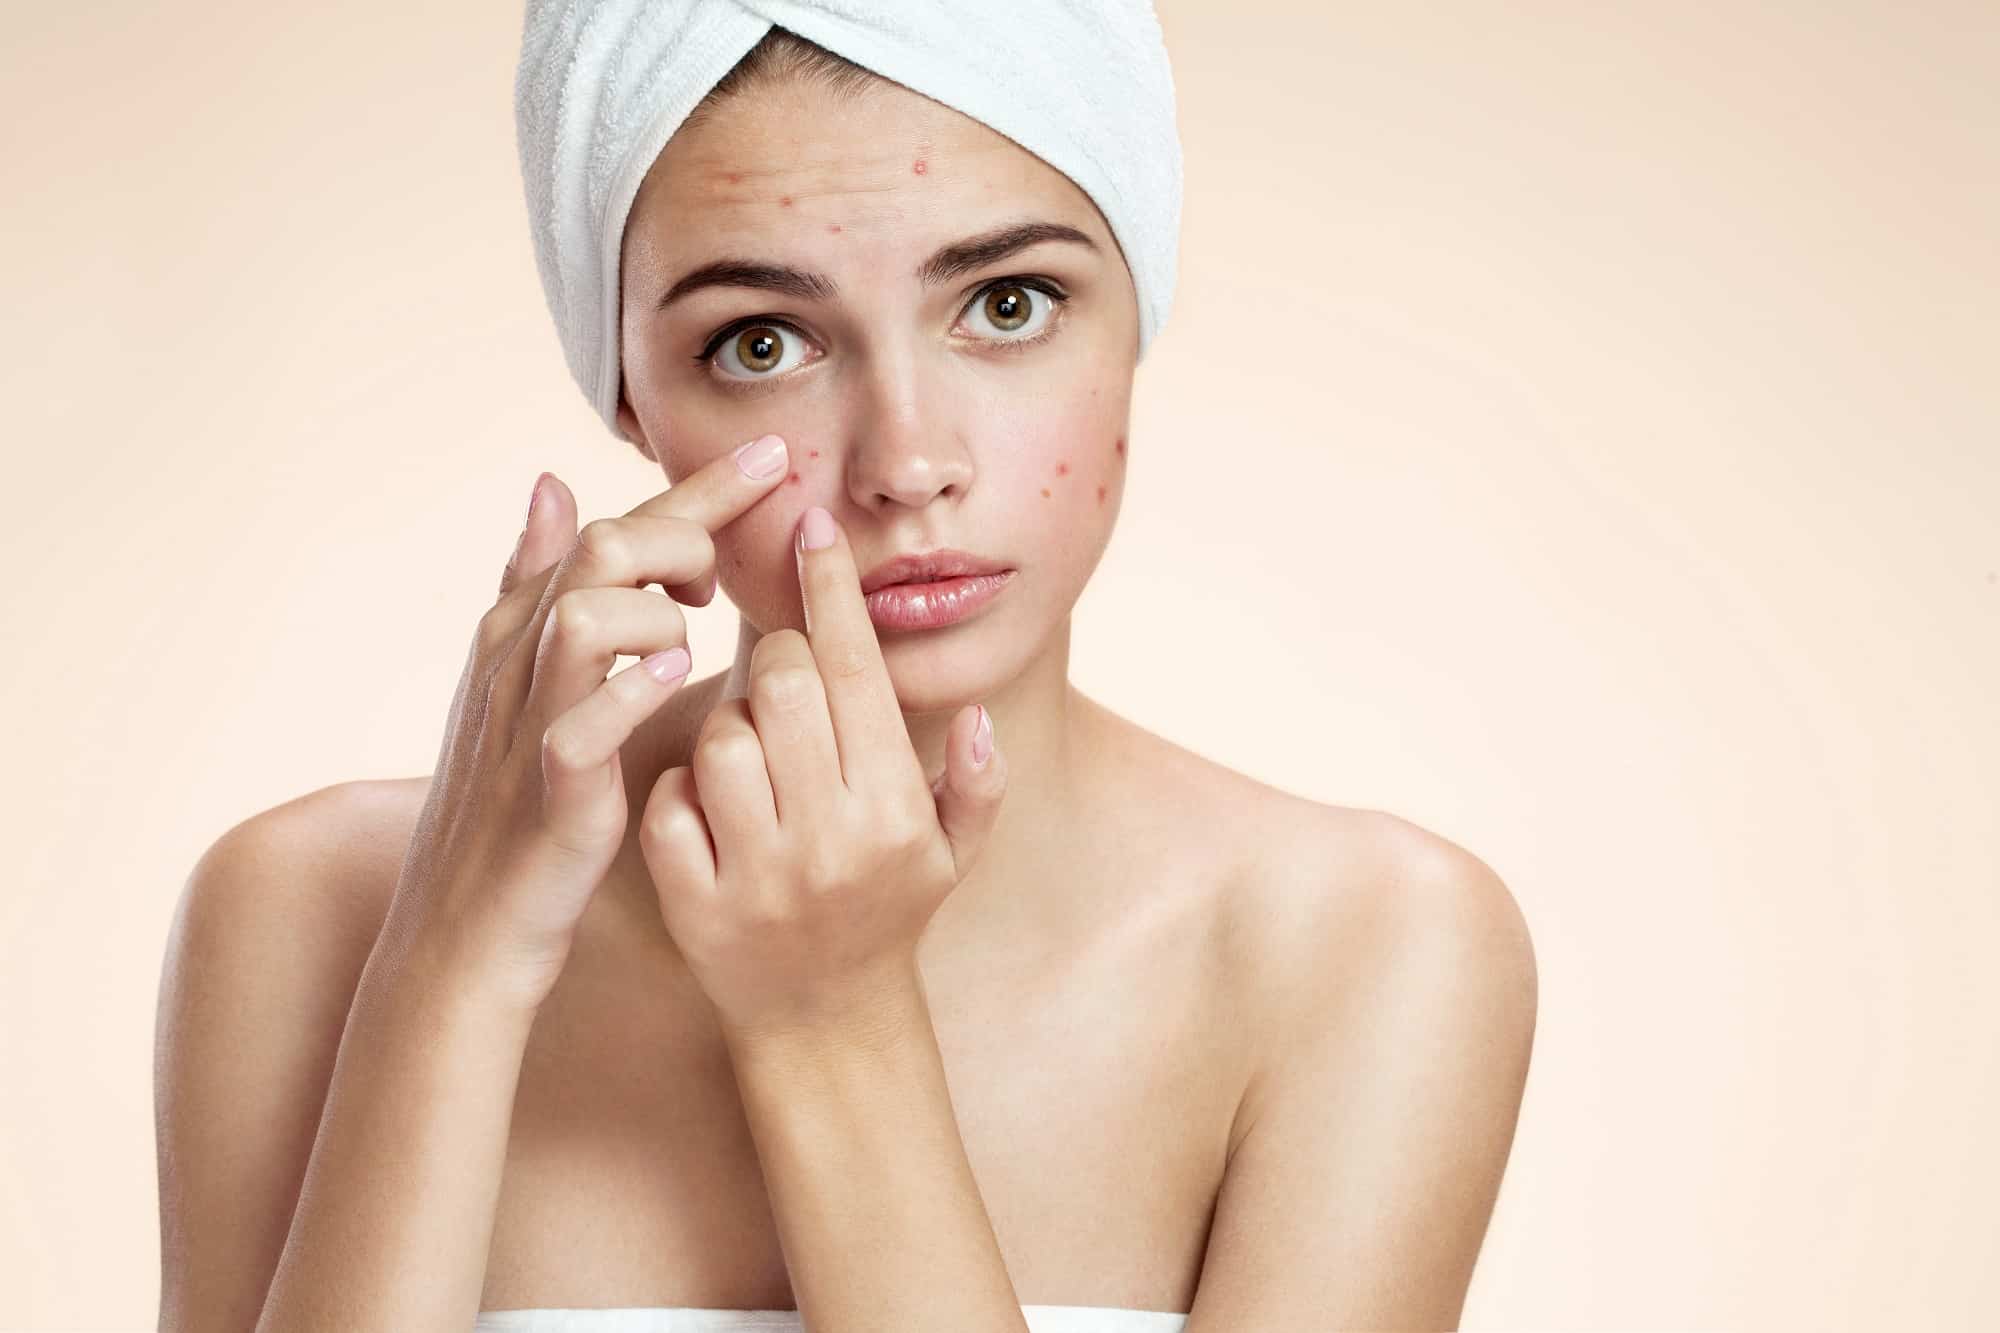 Adult acne – we suggest what lifebloods to use to enjoy a smooth complexion